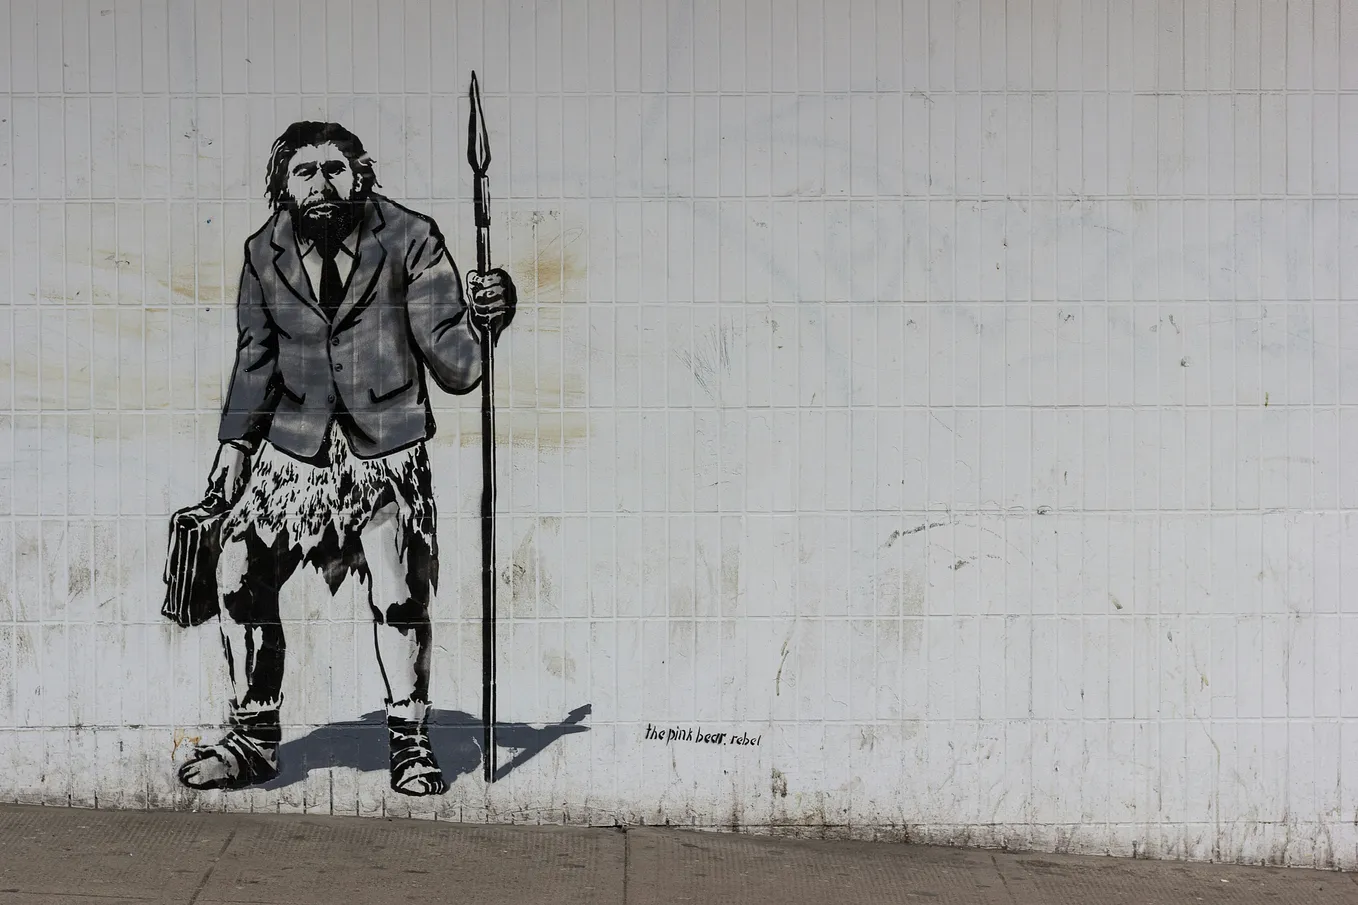 Street art mural depicting a caveman dressed in a modern business suit, holding a briefcase in one hand and a spear in the other, against a tiled wall background. The artwork is signed ‘the pink bear. rebel.’